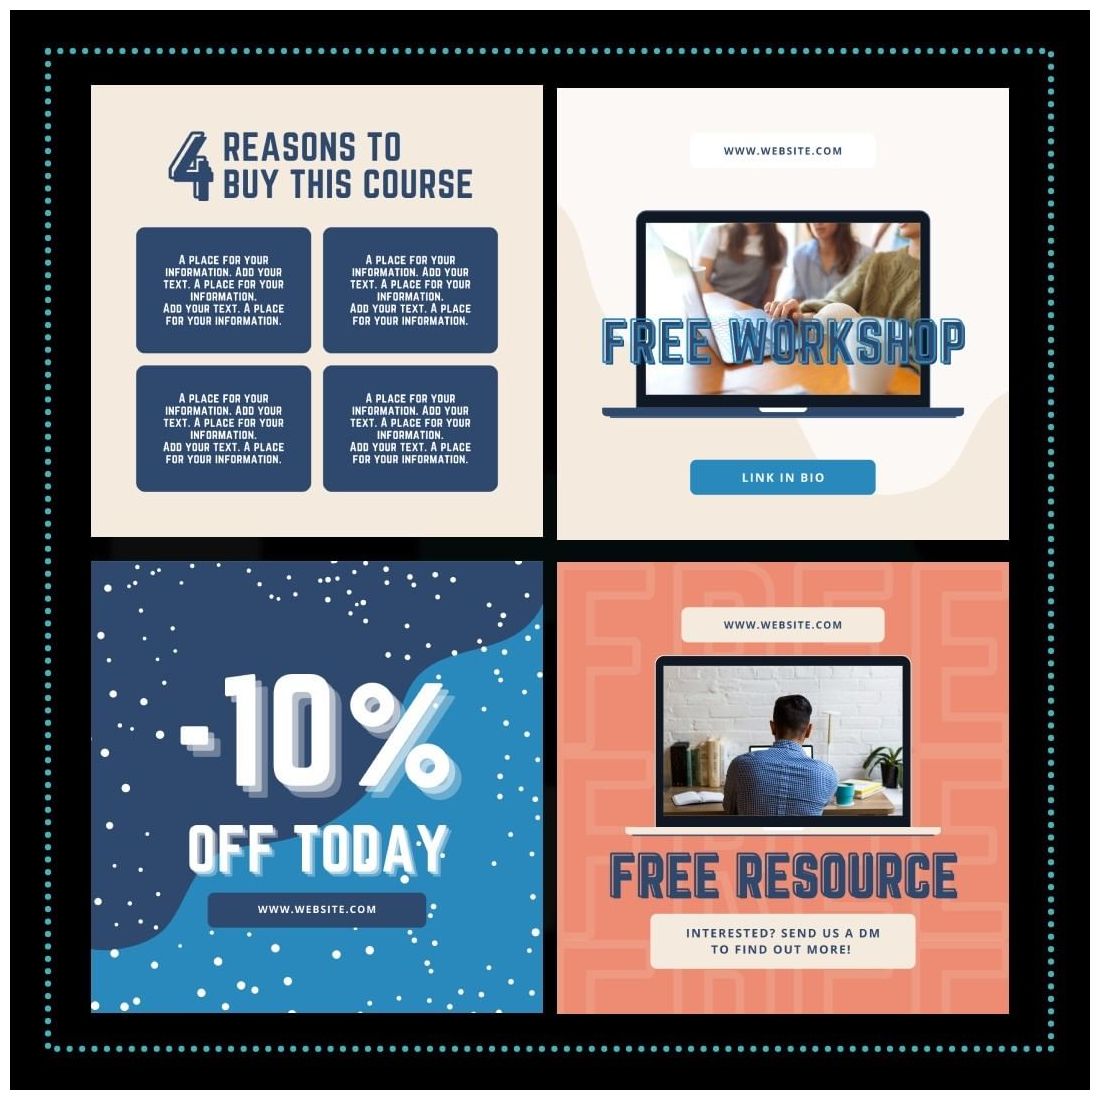 Online Course Sellers Canva Templates cover image.